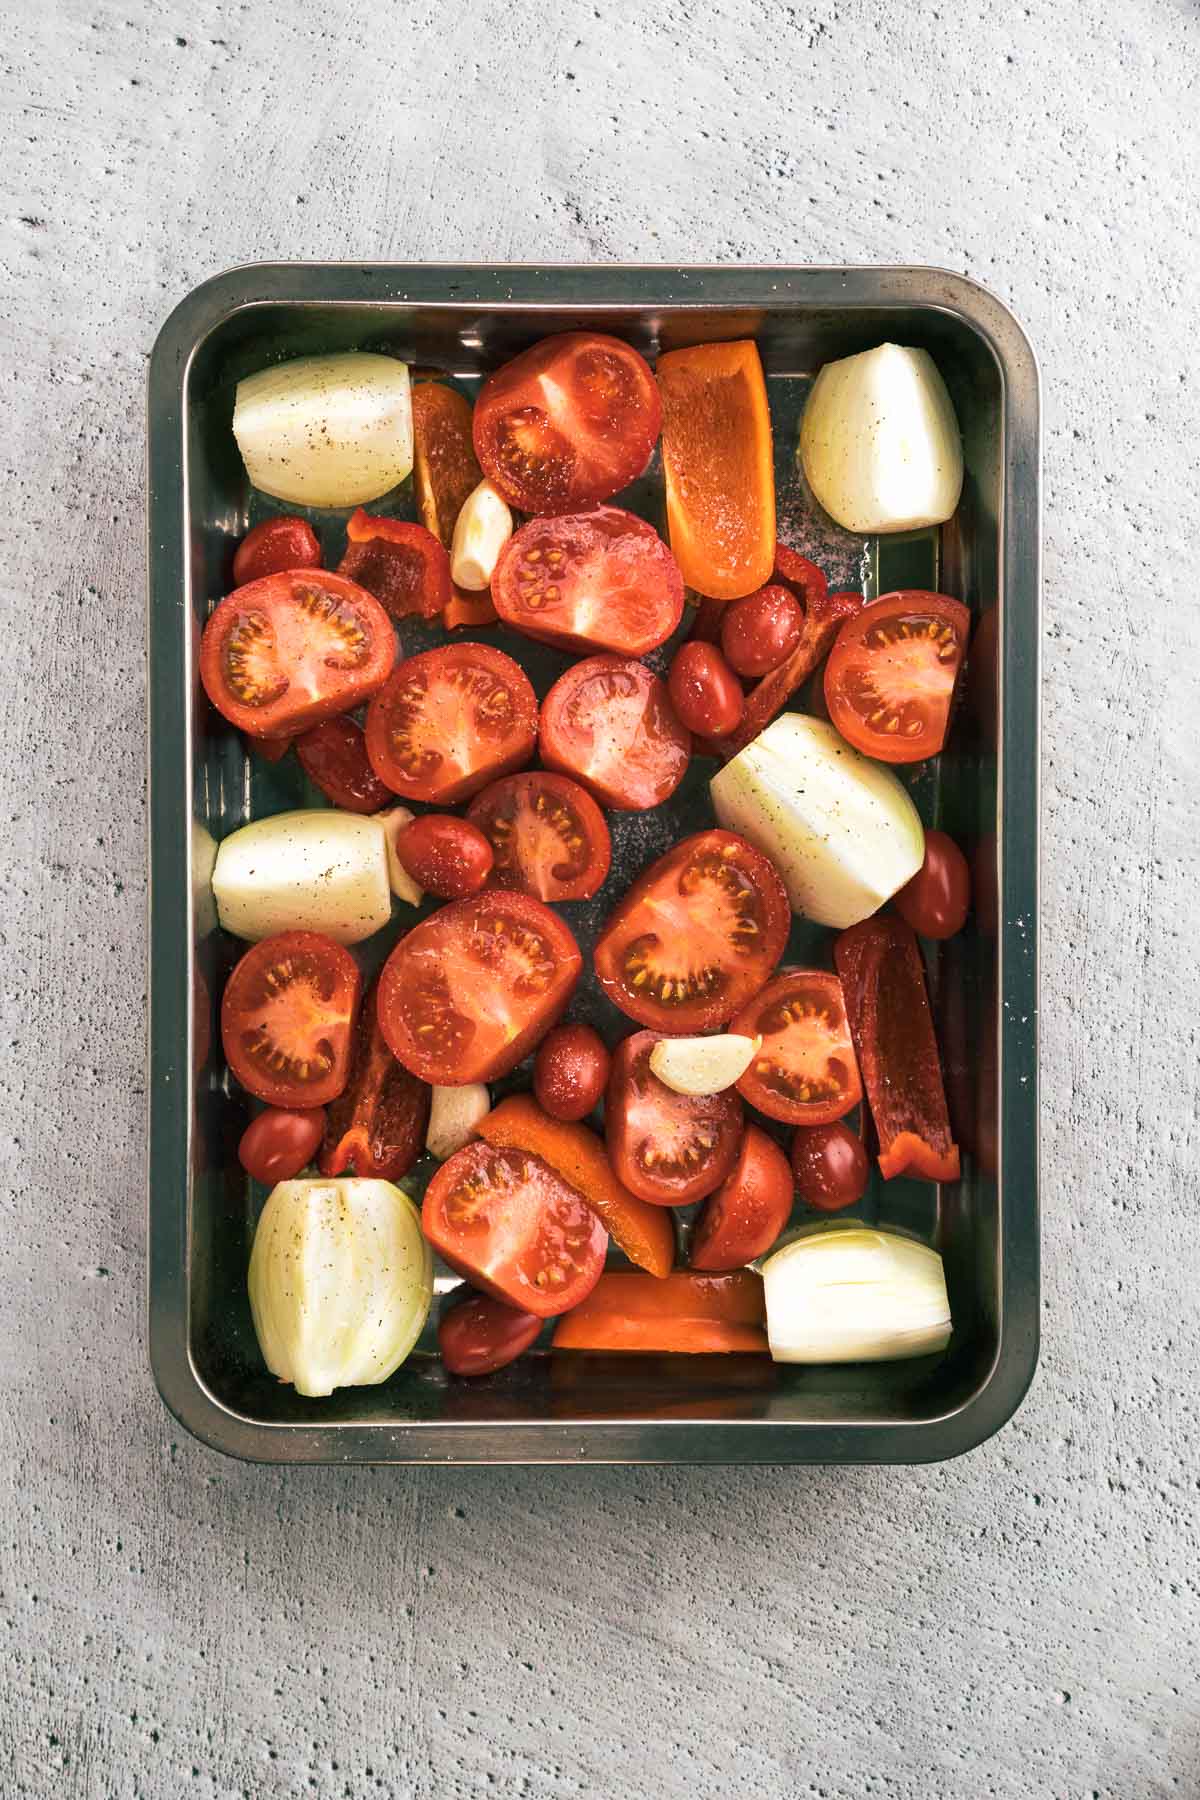 Vegetables in a roasting dish with olive oil, salt and pepper.